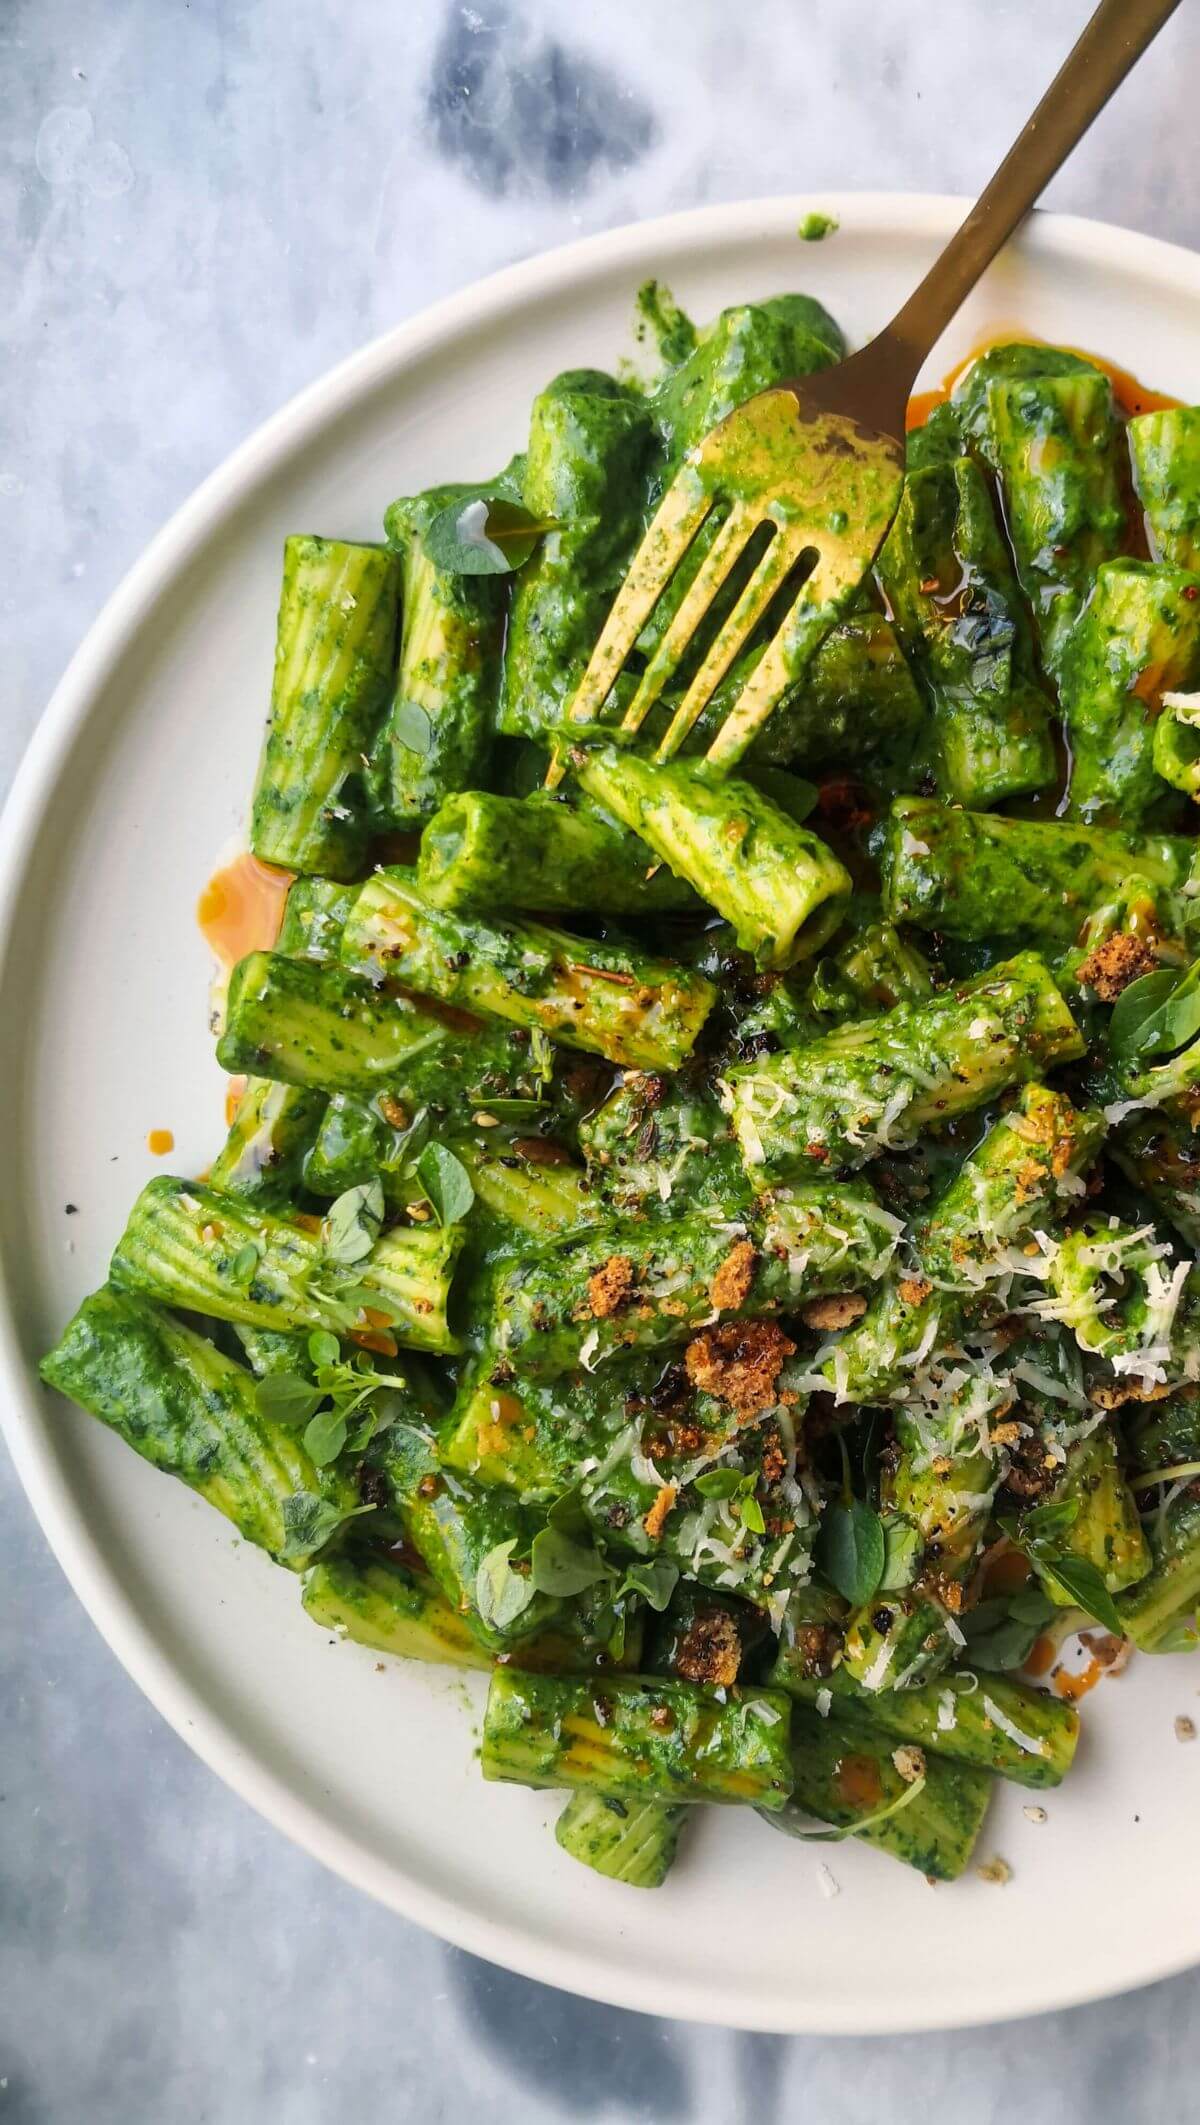 Super green rigatoni with chilli oil drizzled on top on a white plate with a gold fork.